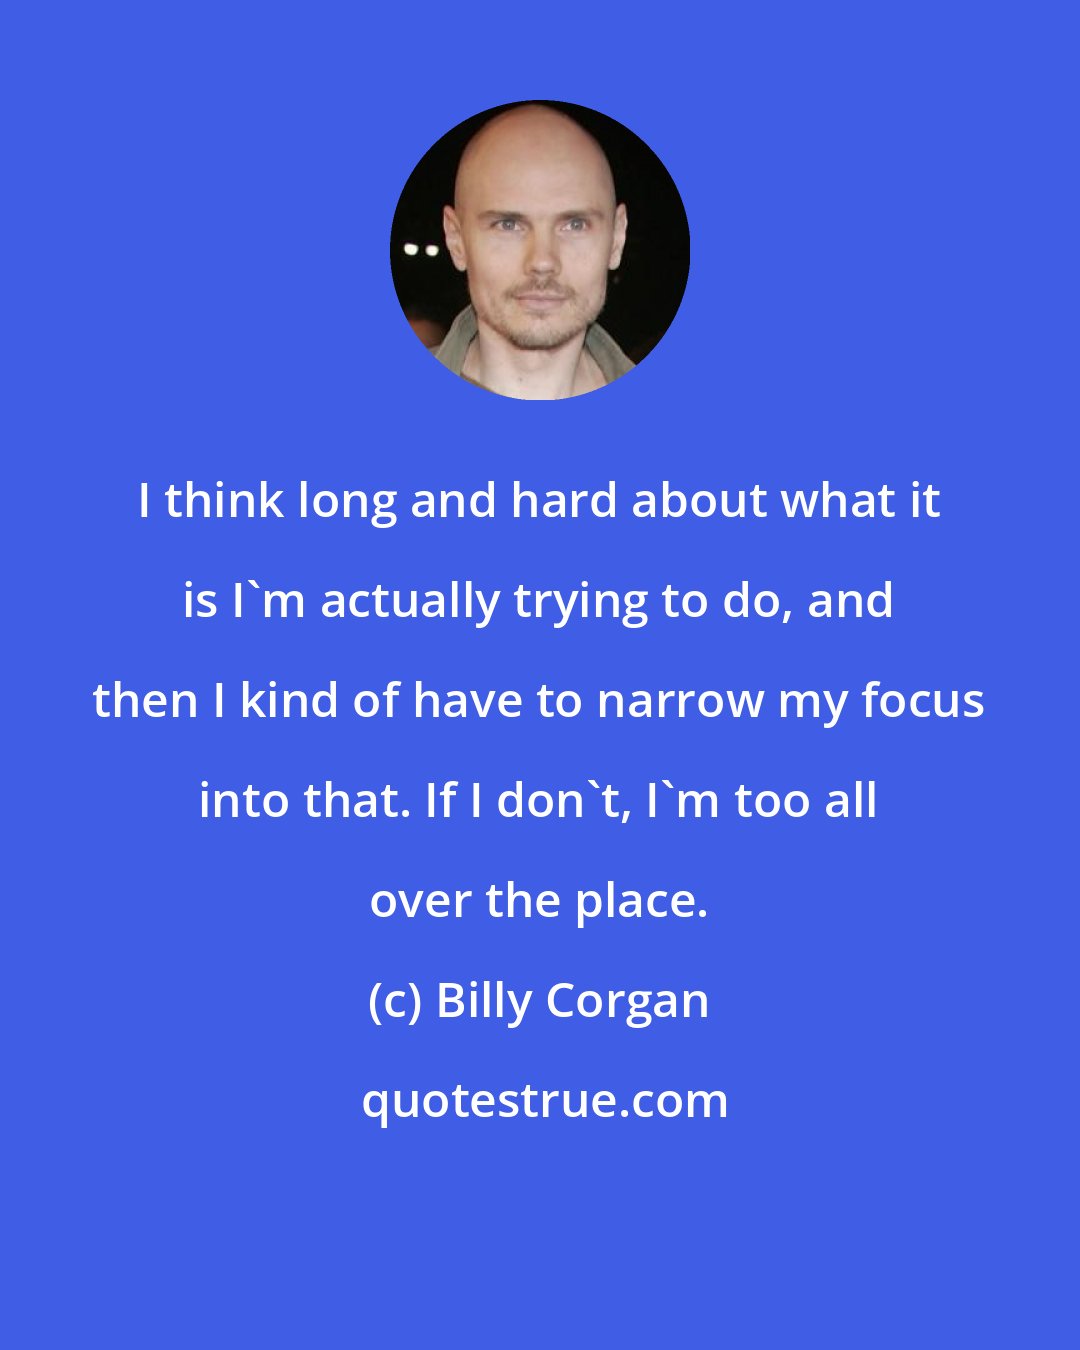 Billy Corgan: I think long and hard about what it is I'm actually trying to do, and then I kind of have to narrow my focus into that. If I don't, I'm too all over the place.